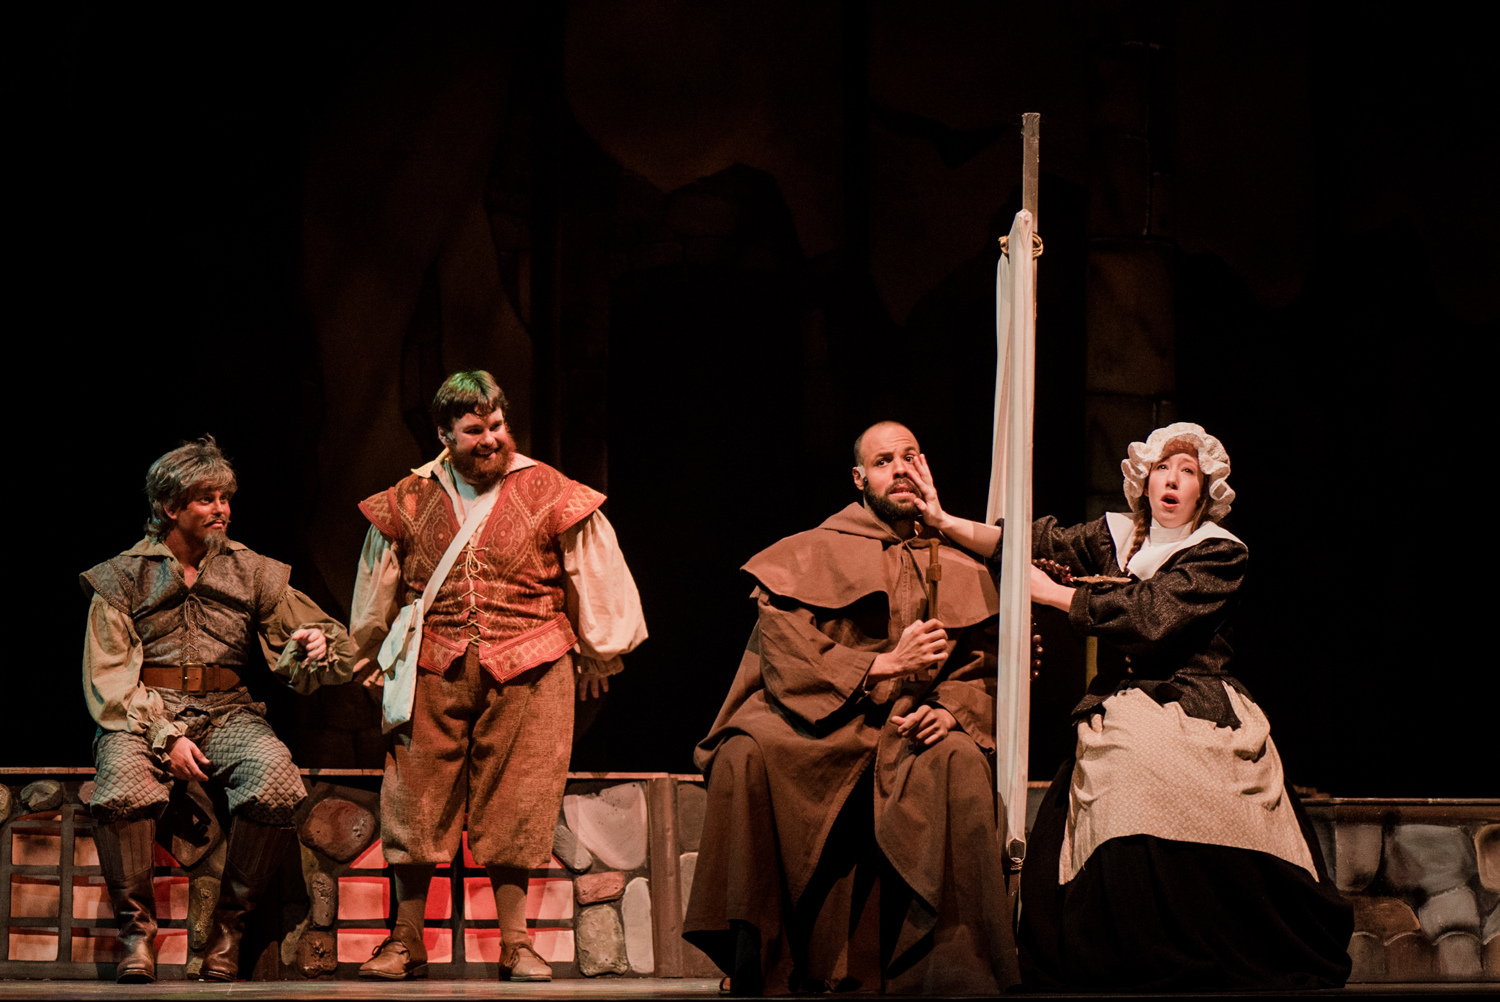  Man of La Mancha Pensacola Opera Directed by Dean Anthony Photo by Meg Burke Photography 